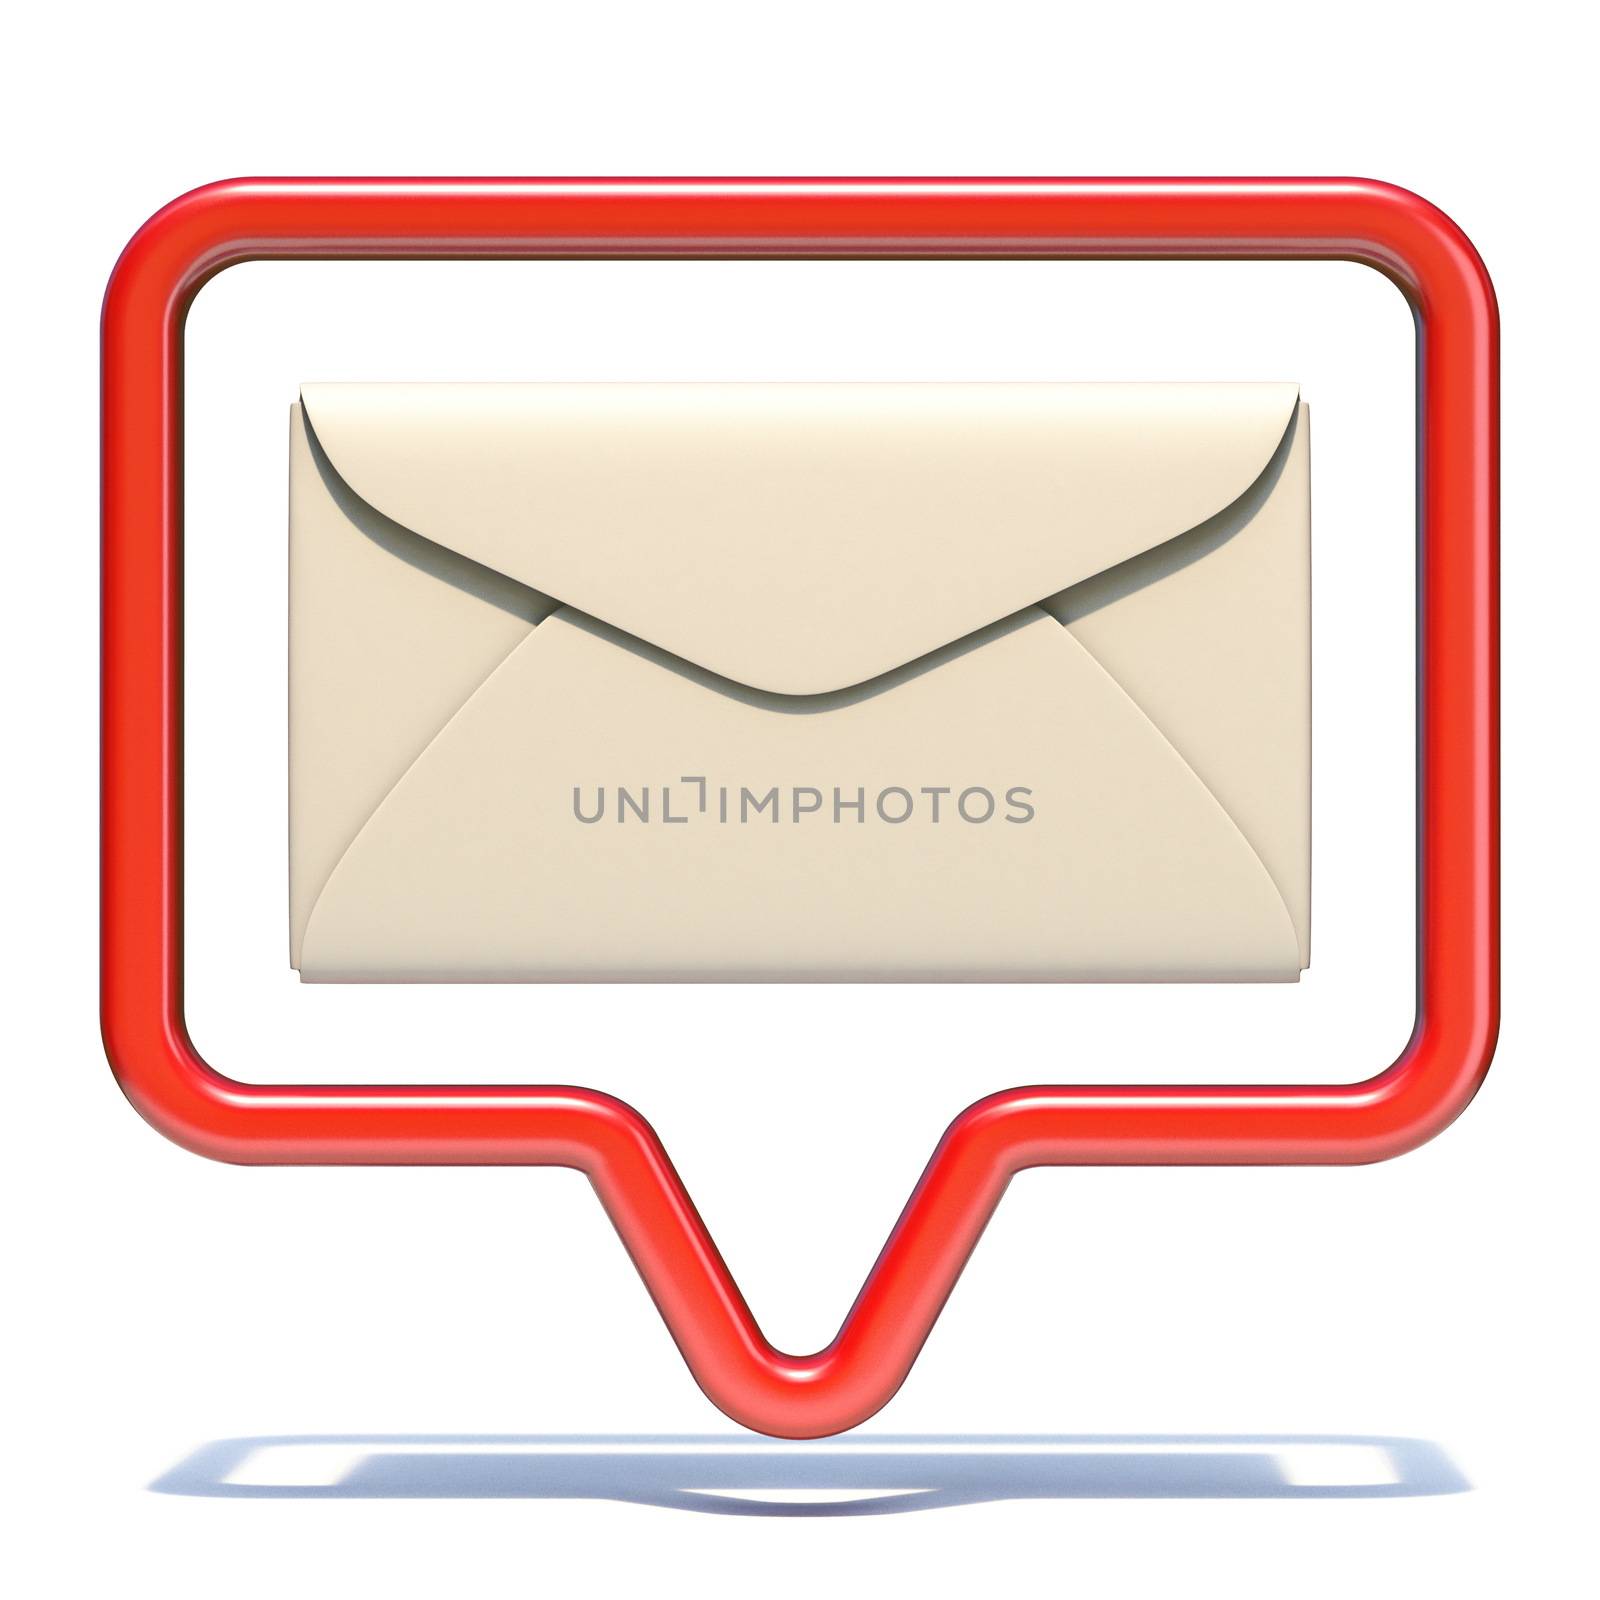 Notification icon with envelope 3D render illustration isolated on white background